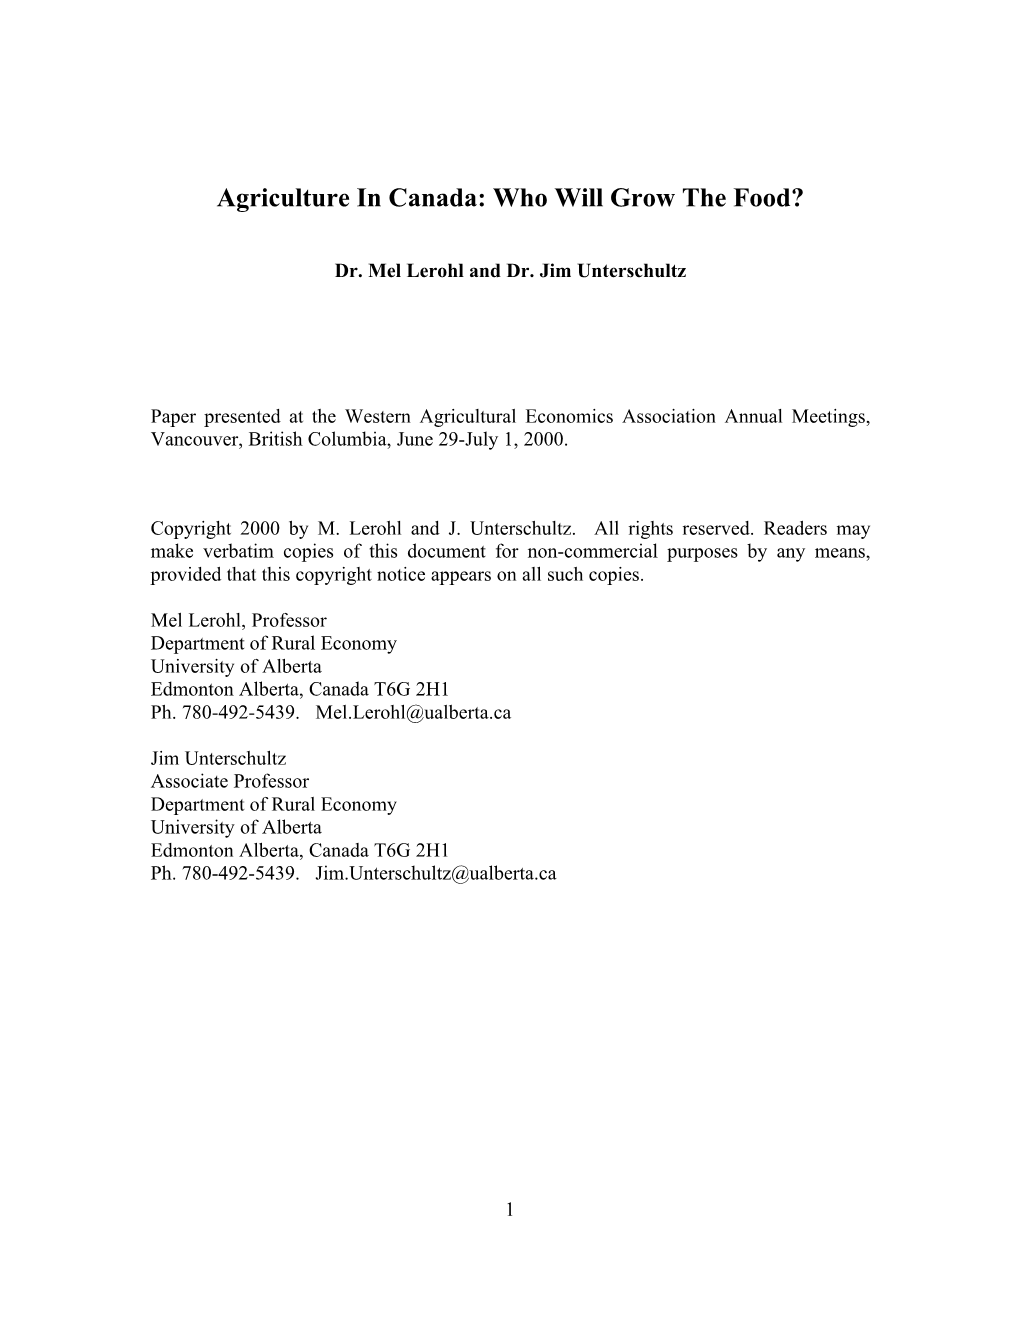 Agriculture in Canada: Who Will Grow the Food?